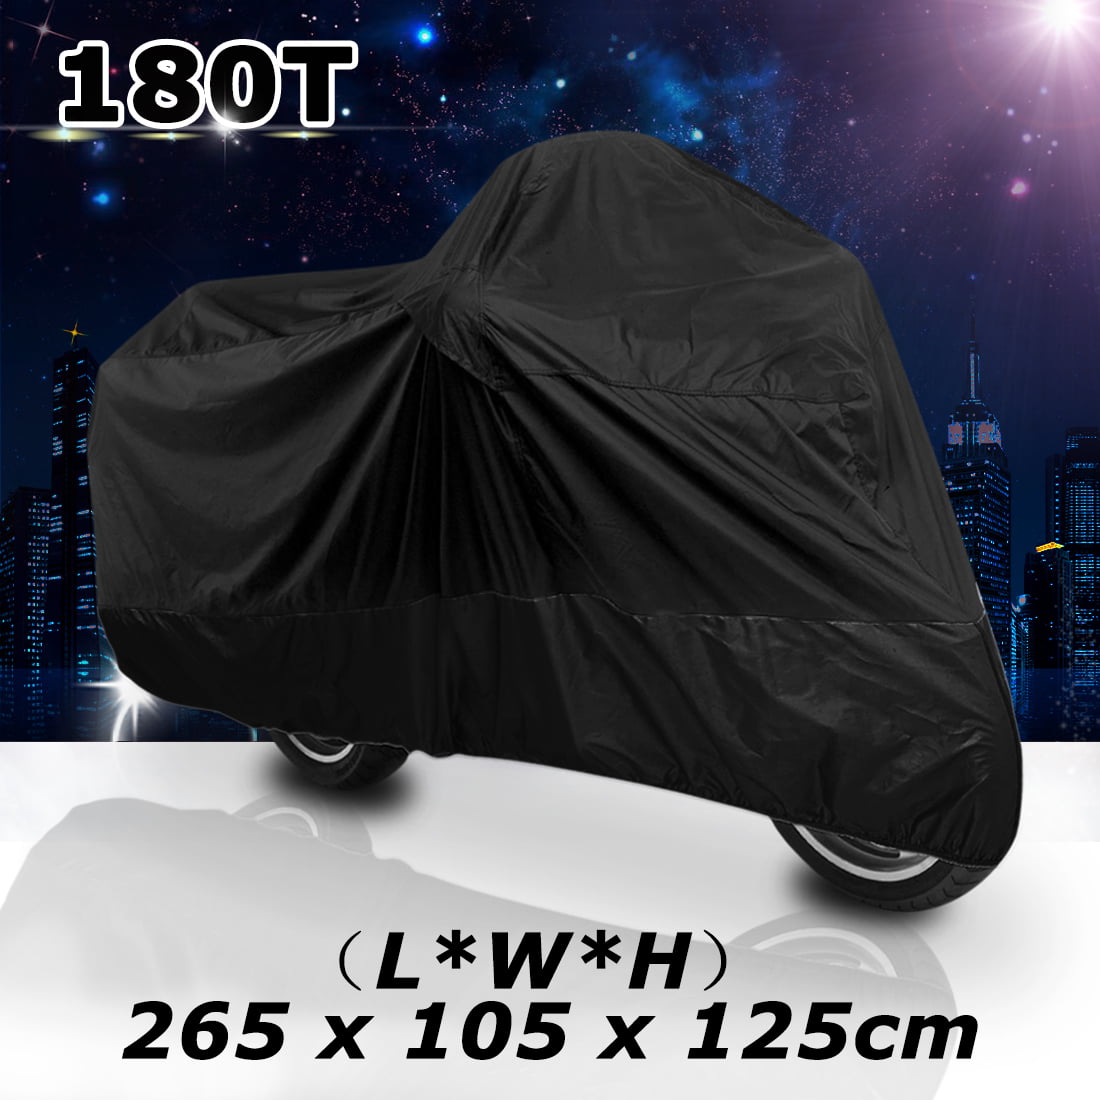 XXL Motorcycle Outdoor Cover For Harley Davidson Heritage Softail Classic FLSTC